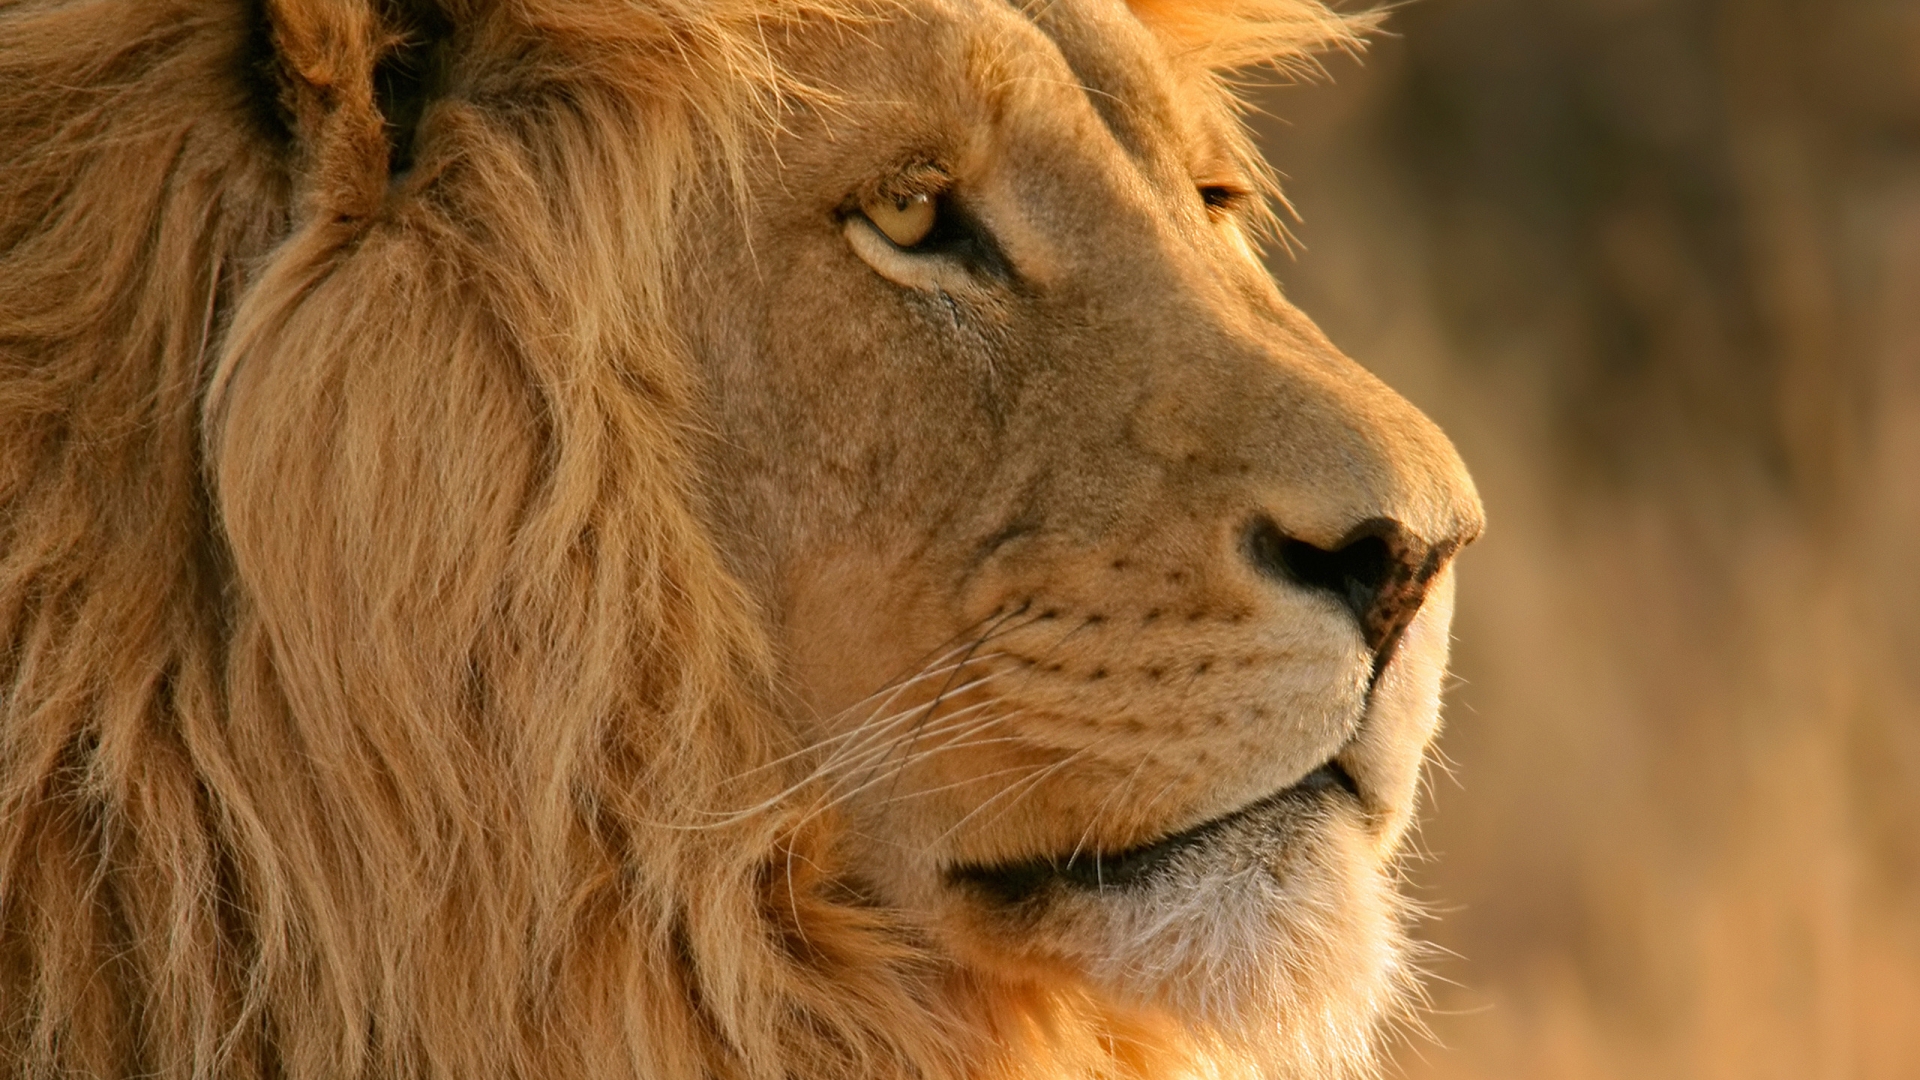 Lion Close Up for 1920 x 1080 HDTV 1080p resolution